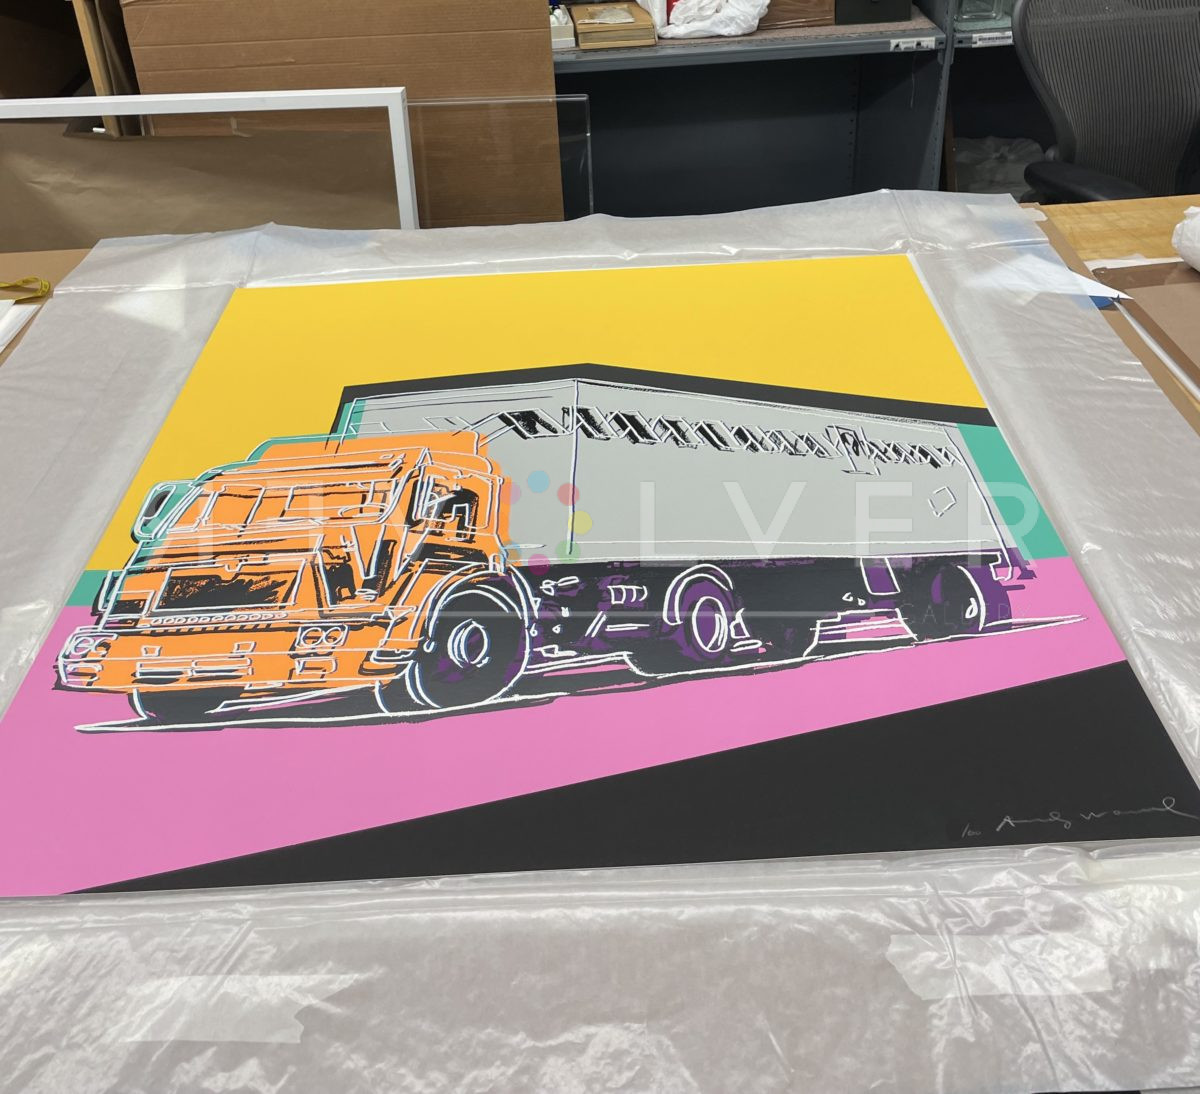 Andy Warhol's truck 367 screen print out of frame